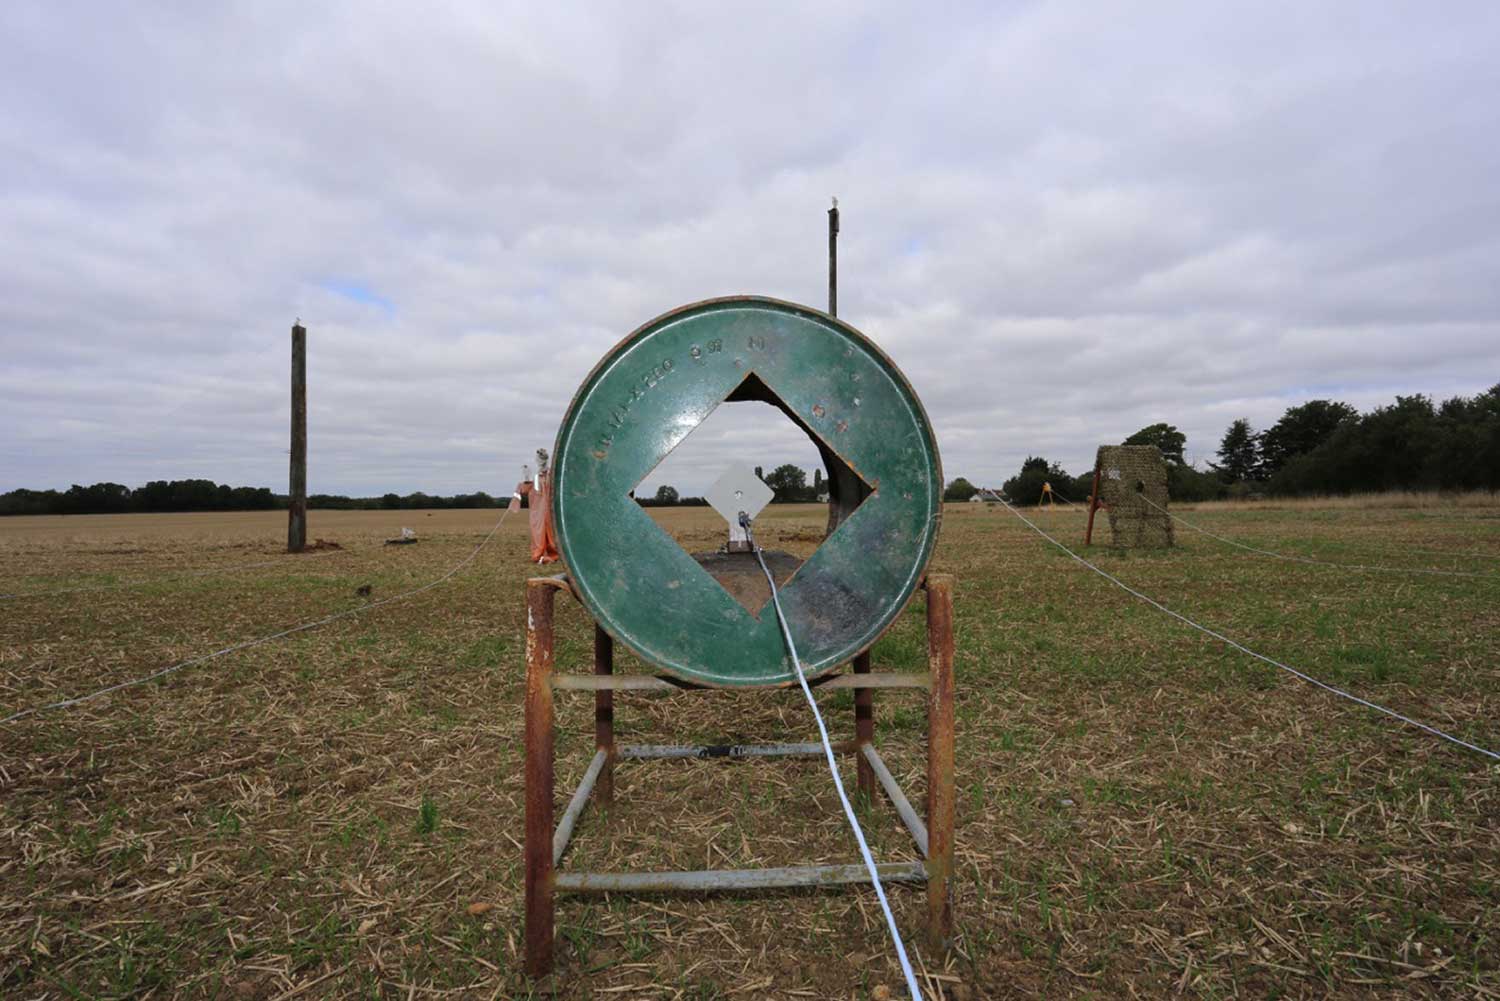 The Hunter Field Target Course (HFT) at Pete’s Airgun Farm in Essex